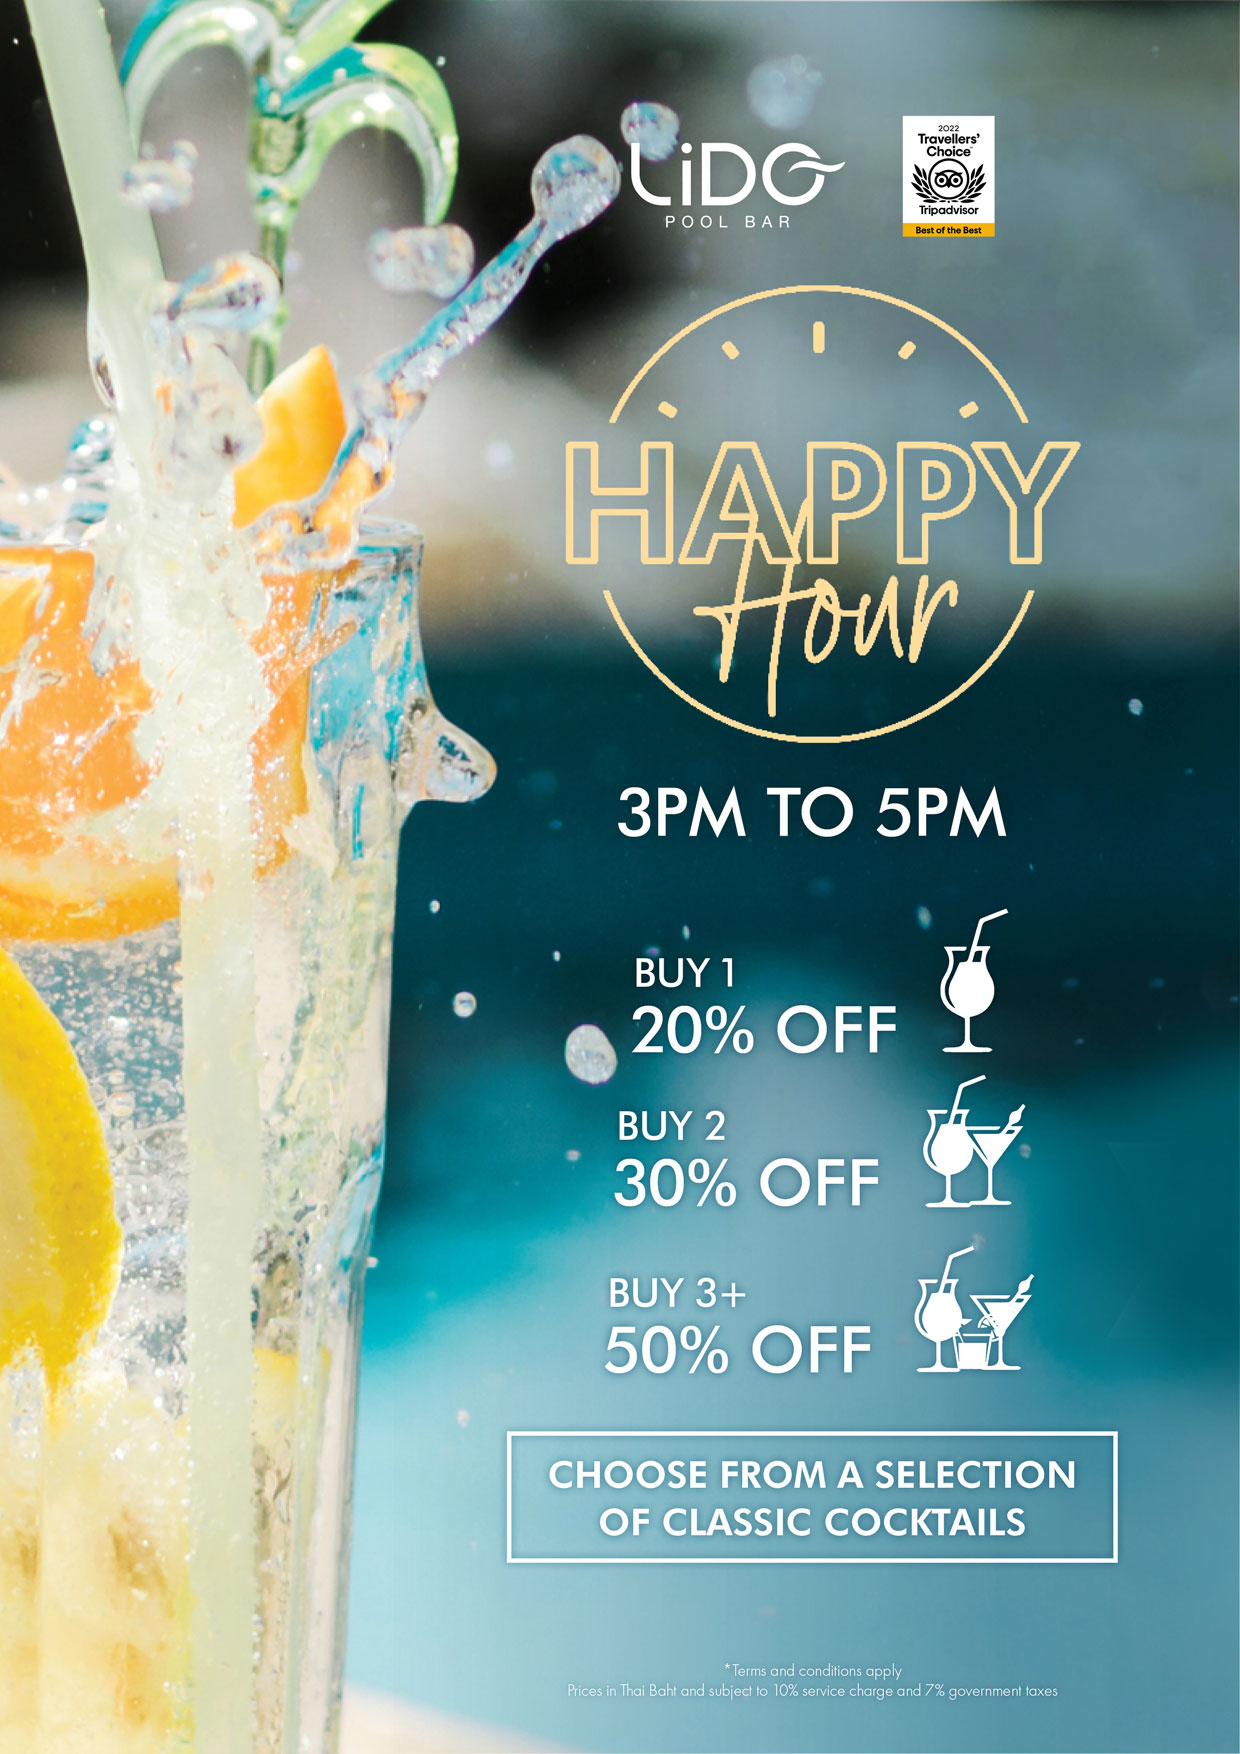 Happy Hour Promotion at Lido Pool Bar in Phuket